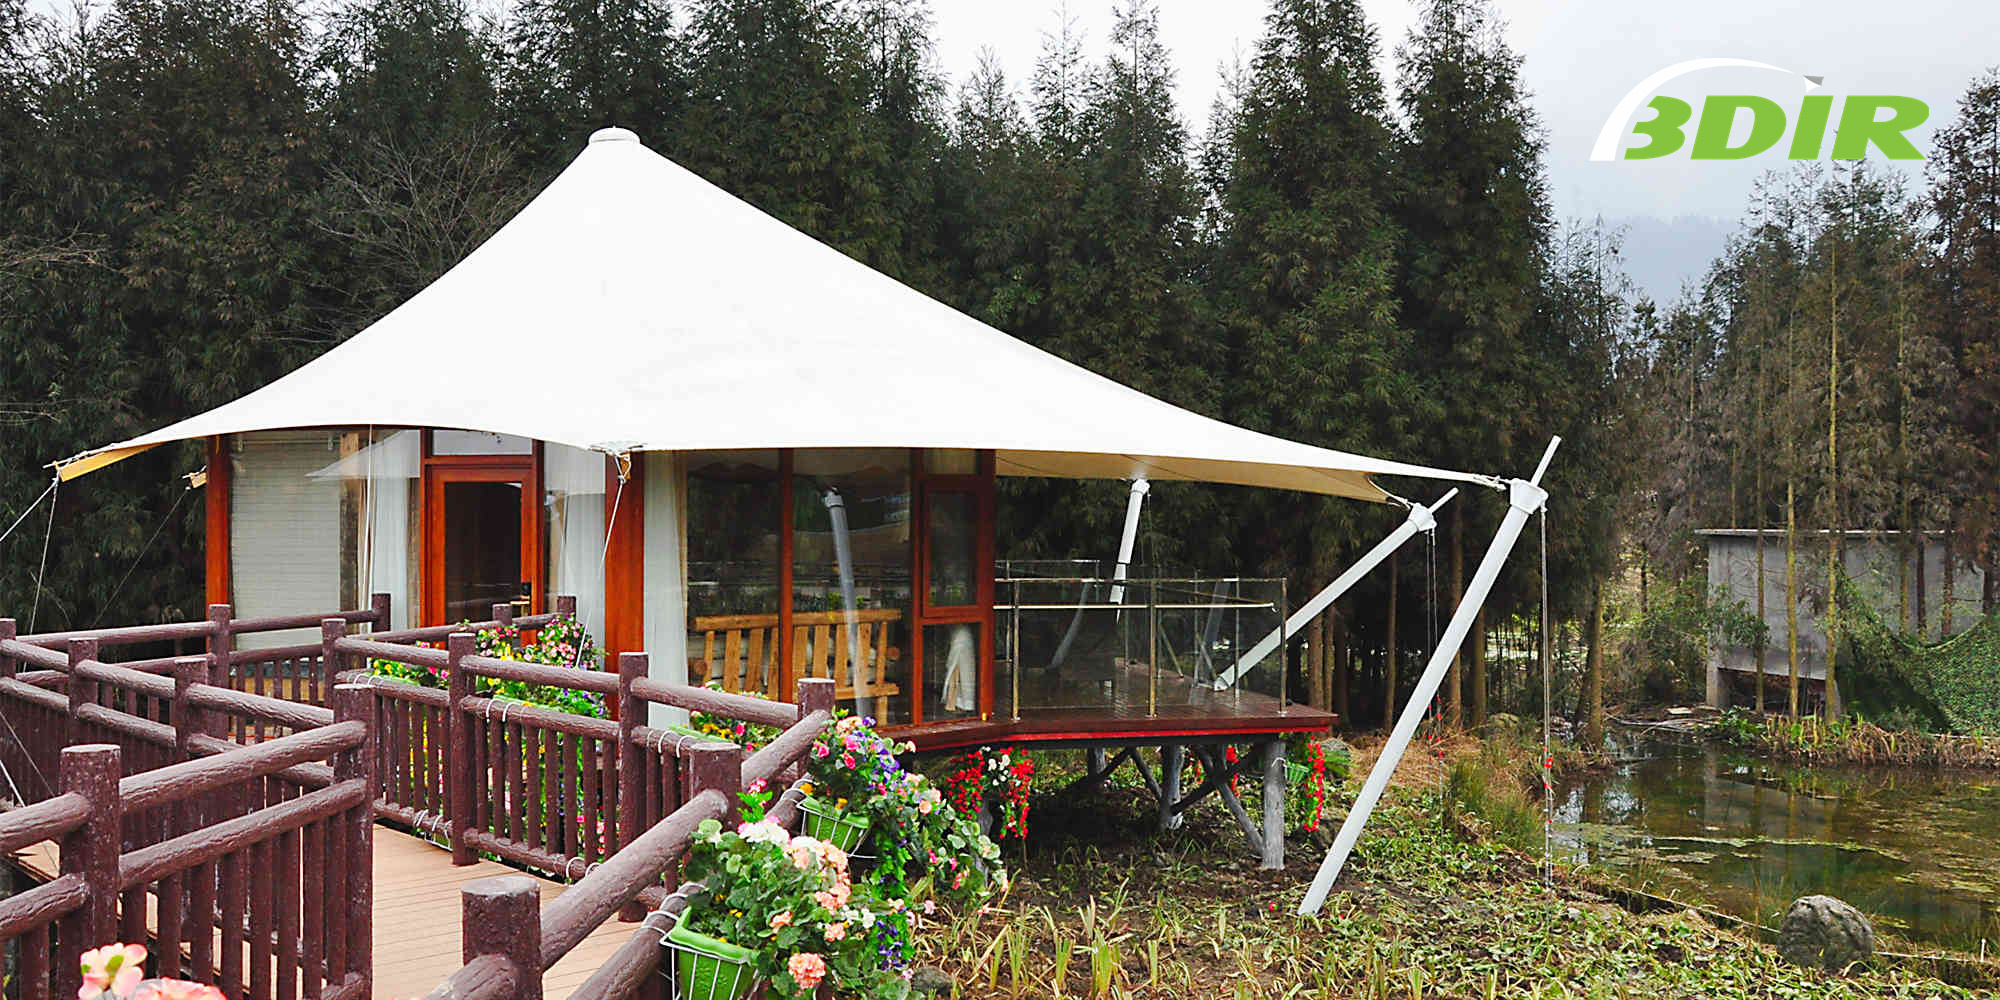 Get A Lux Of Better Outdoor With Bdir Glamping